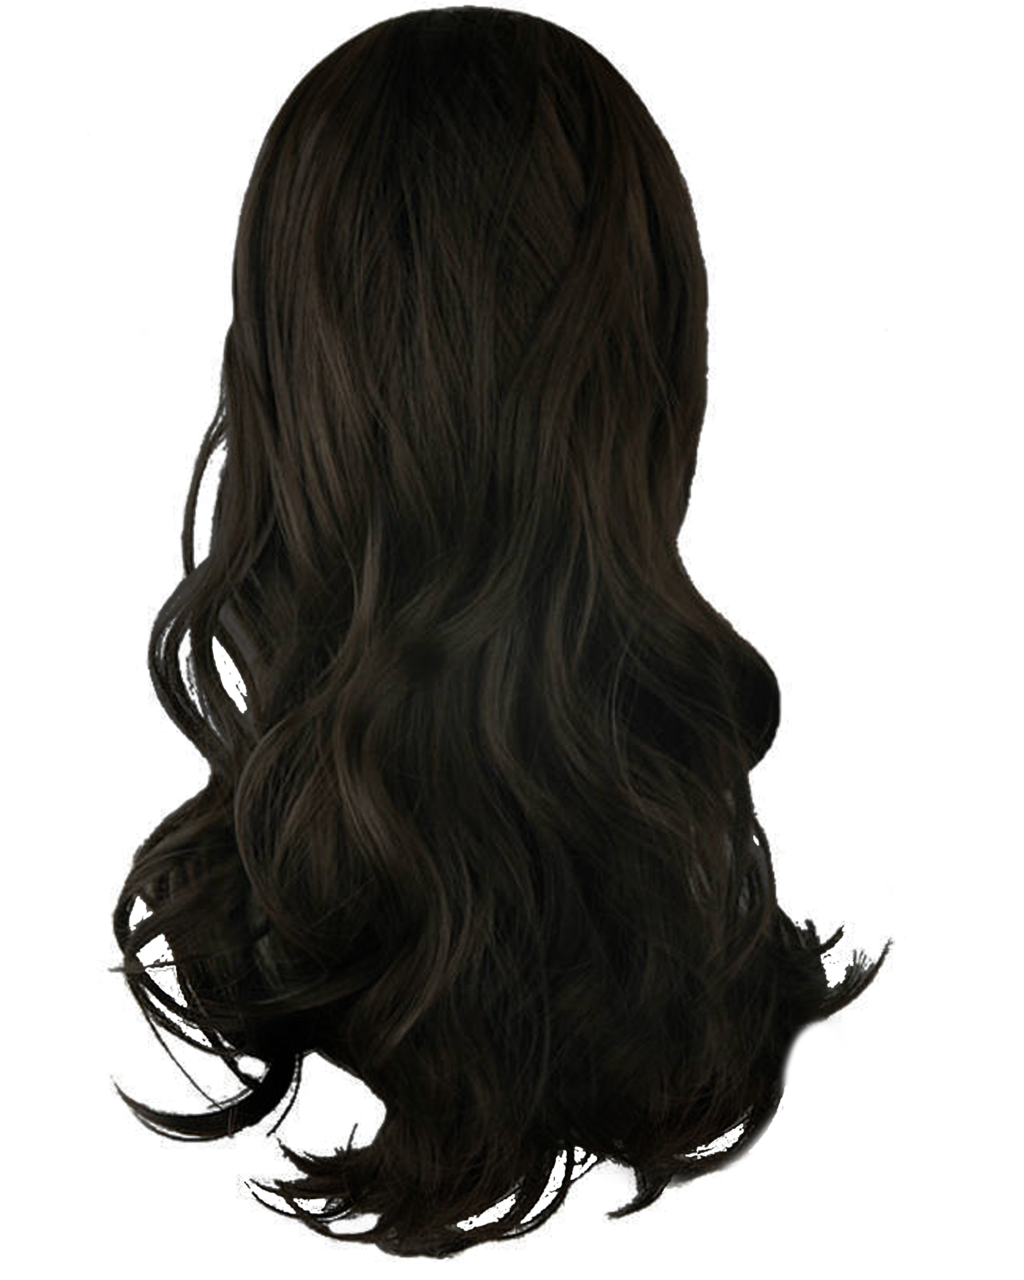 Women hair PNG image transparent image download, size: 1024x1280px